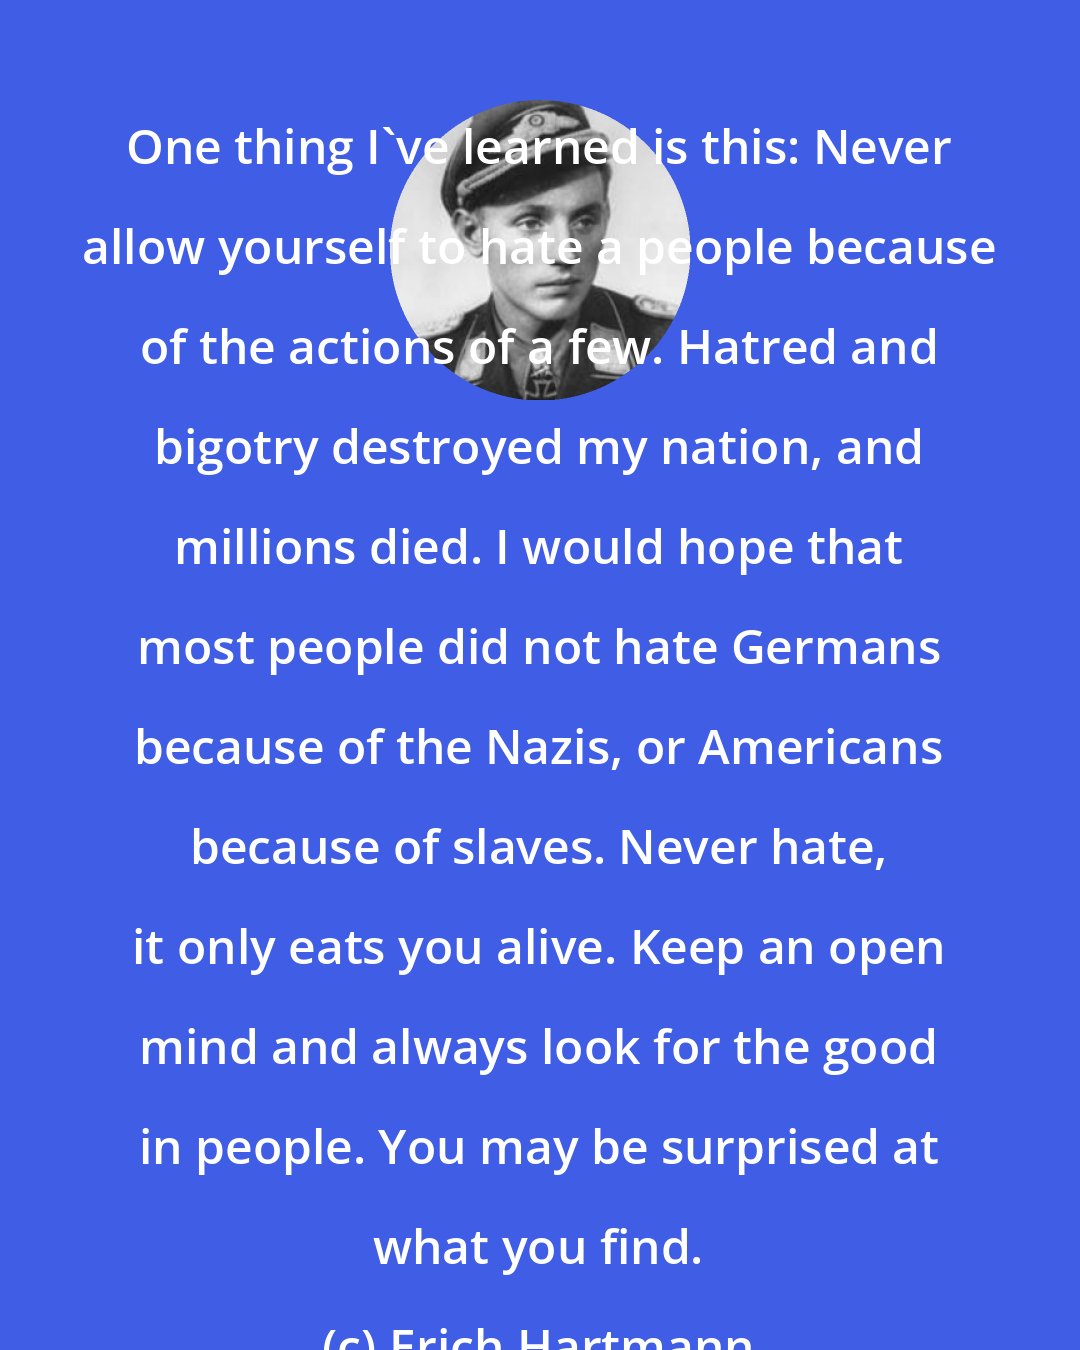 Erich Hartmann: One thing I've learned is this: Never allow yourself to hate a people because of the actions of a few. Hatred and bigotry destroyed my nation, and millions died. I would hope that most people did not hate Germans because of the Nazis, or Americans because of slaves. Never hate, it only eats you alive. Keep an open mind and always look for the good in people. You may be surprised at what you find.